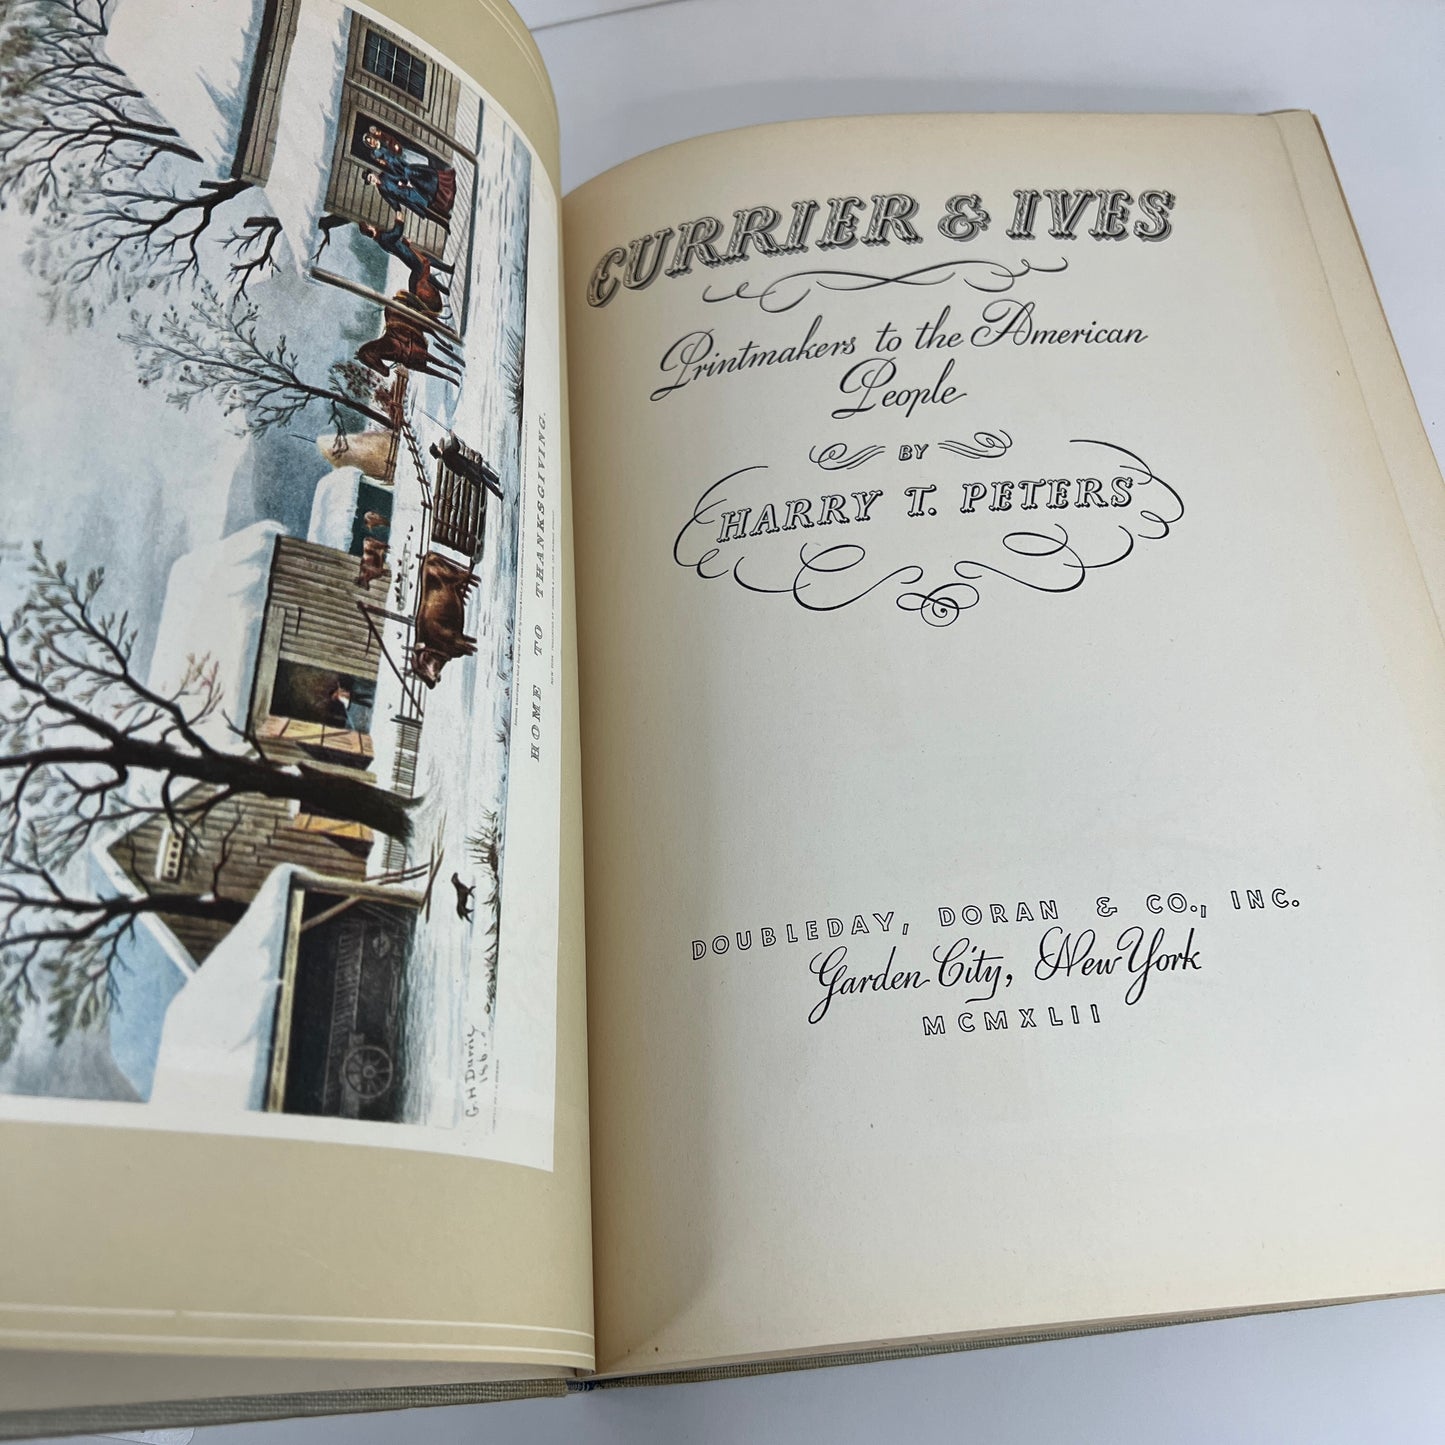 Currier & Ives: Printmakers to the American People